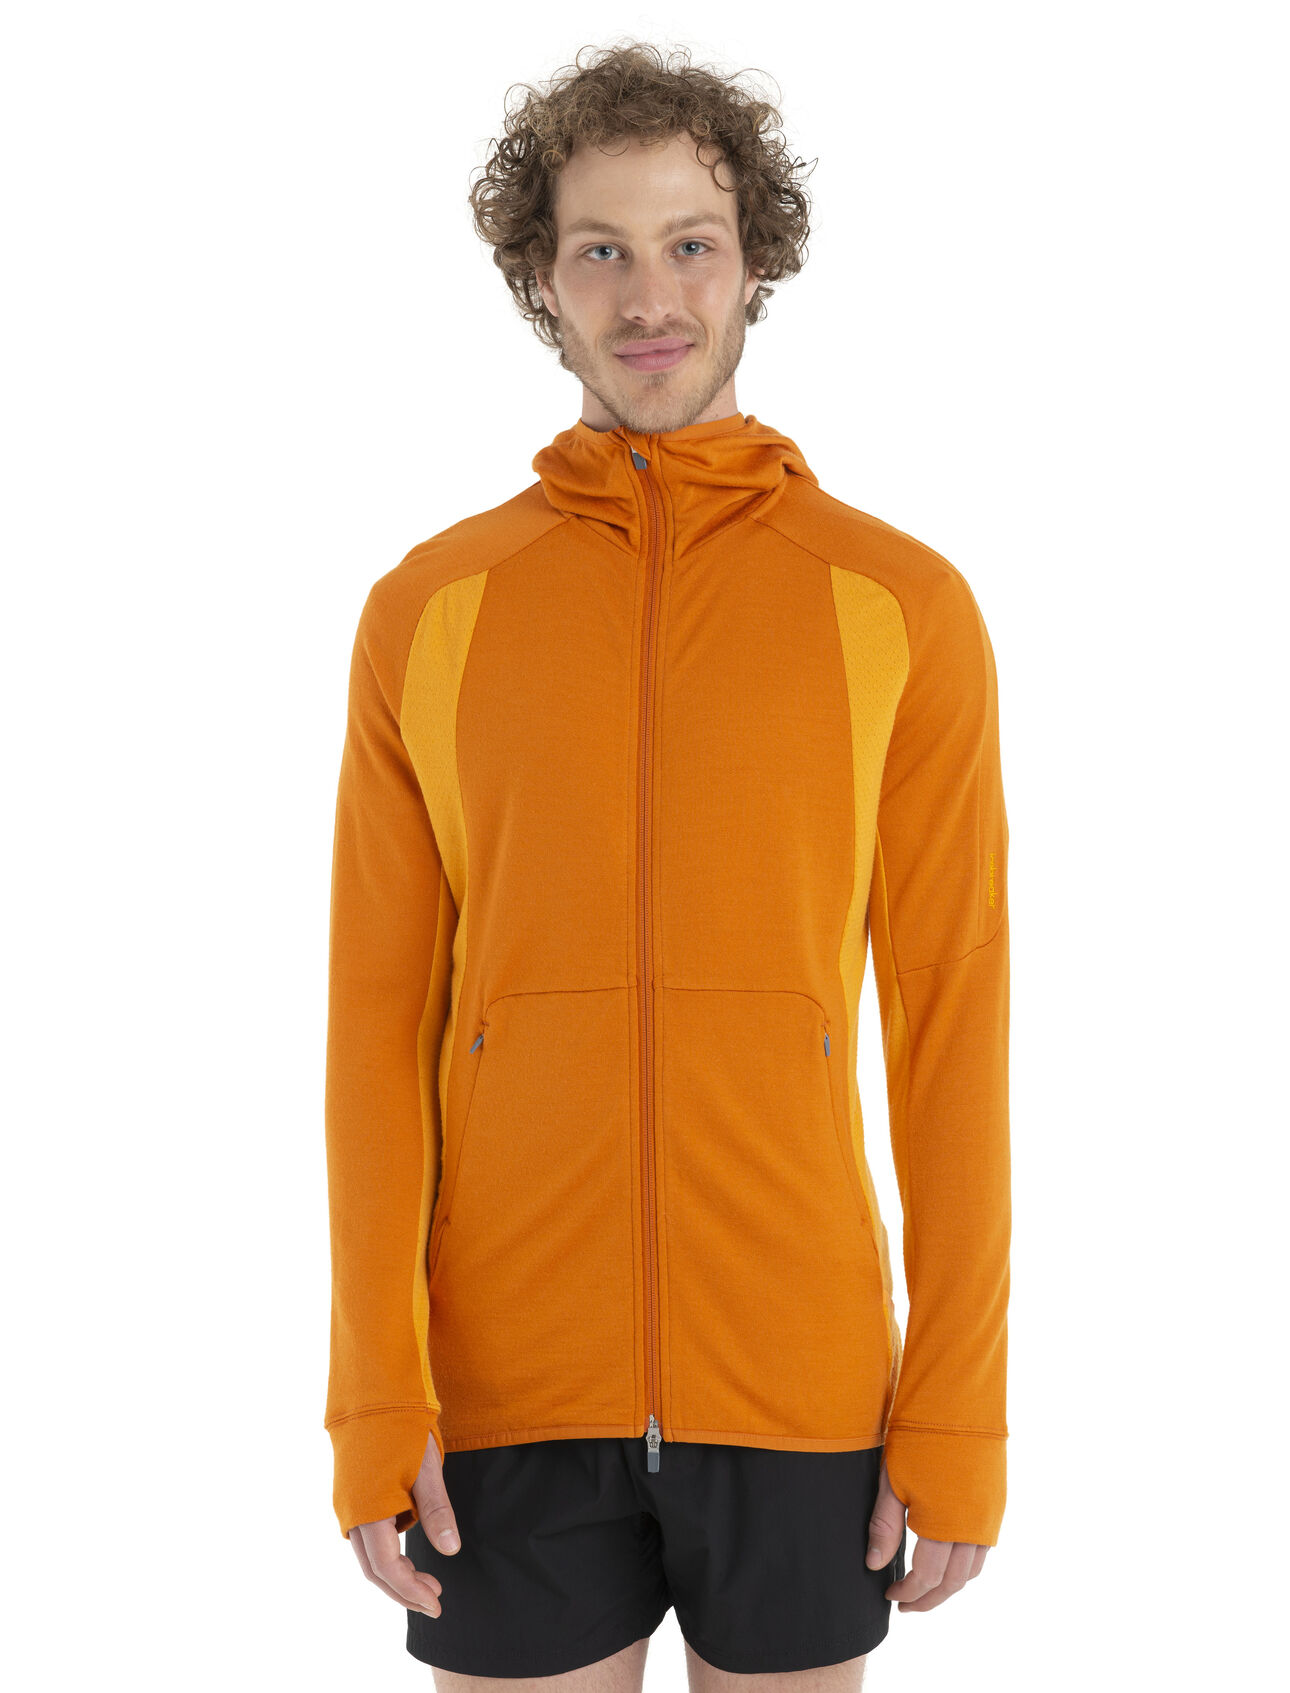 Mens ZoneKnit™ Merino Long Sleeve Zip Hoodie A midweight hoodie designed to balance warmth and breathability while on the move, the ZoneKnit™ Long Sleeve Zip Hood jersey fabric with strategic panels of eyelet mesh for enhanced airflow.